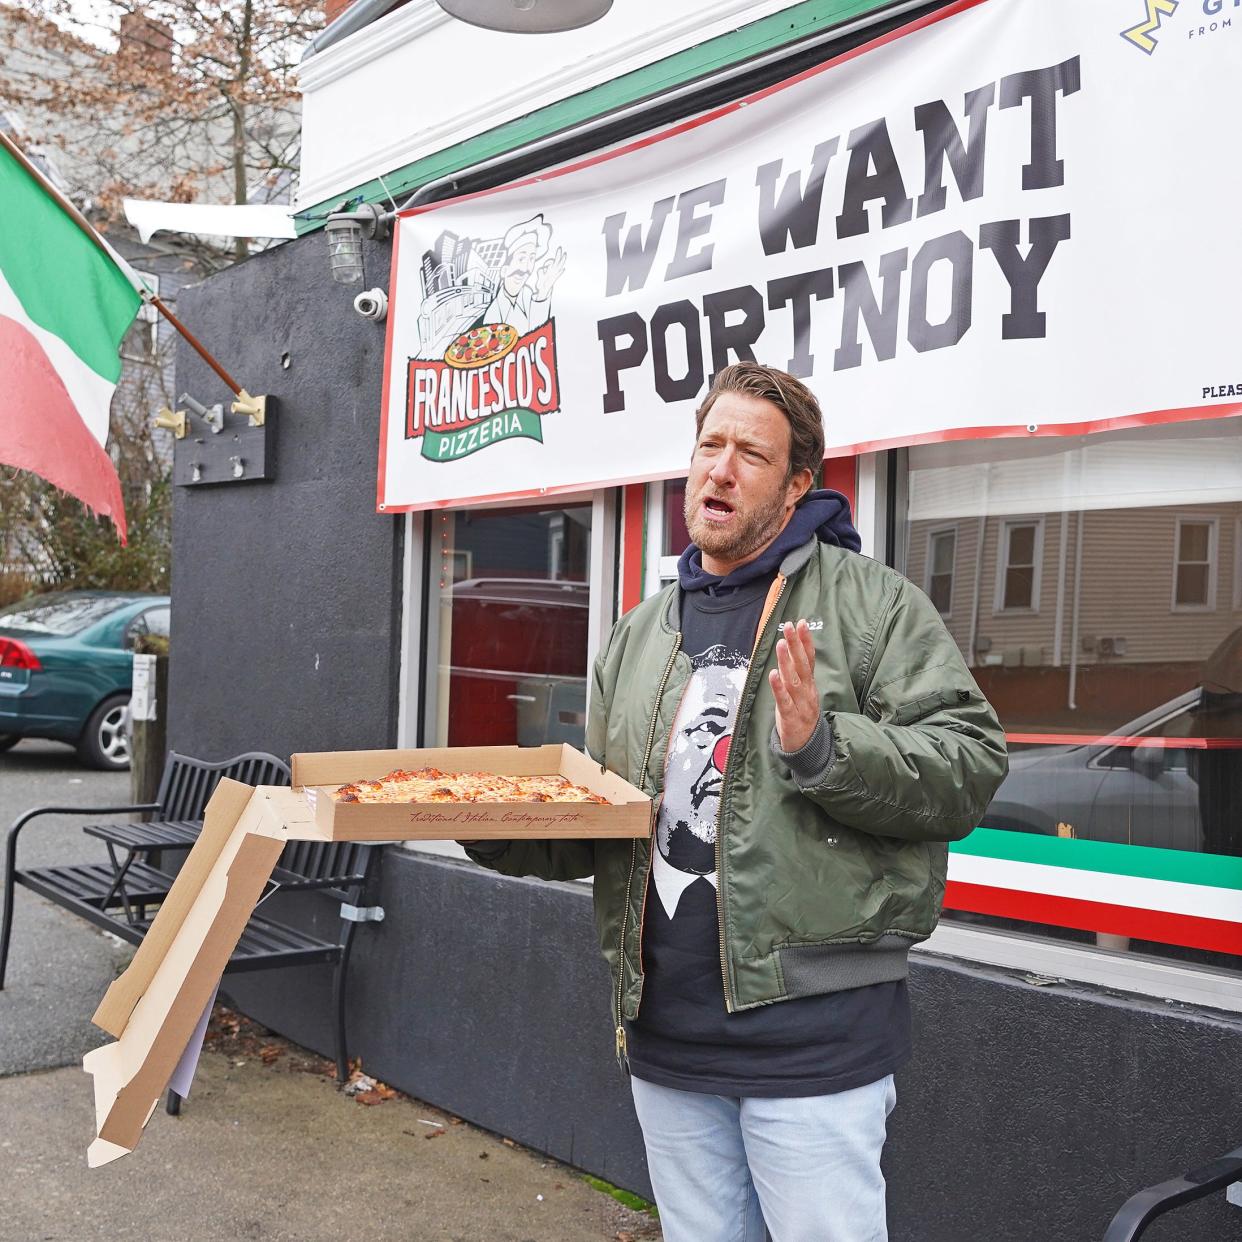 Barstool Sports founder and pizza influencer Dave Portnoy went on a four-shop tour of RI pizza places Thursday and stopped at Francesco's on Hope St. after owner Frank Schiavone got Portnoy's attention with some confident signage.